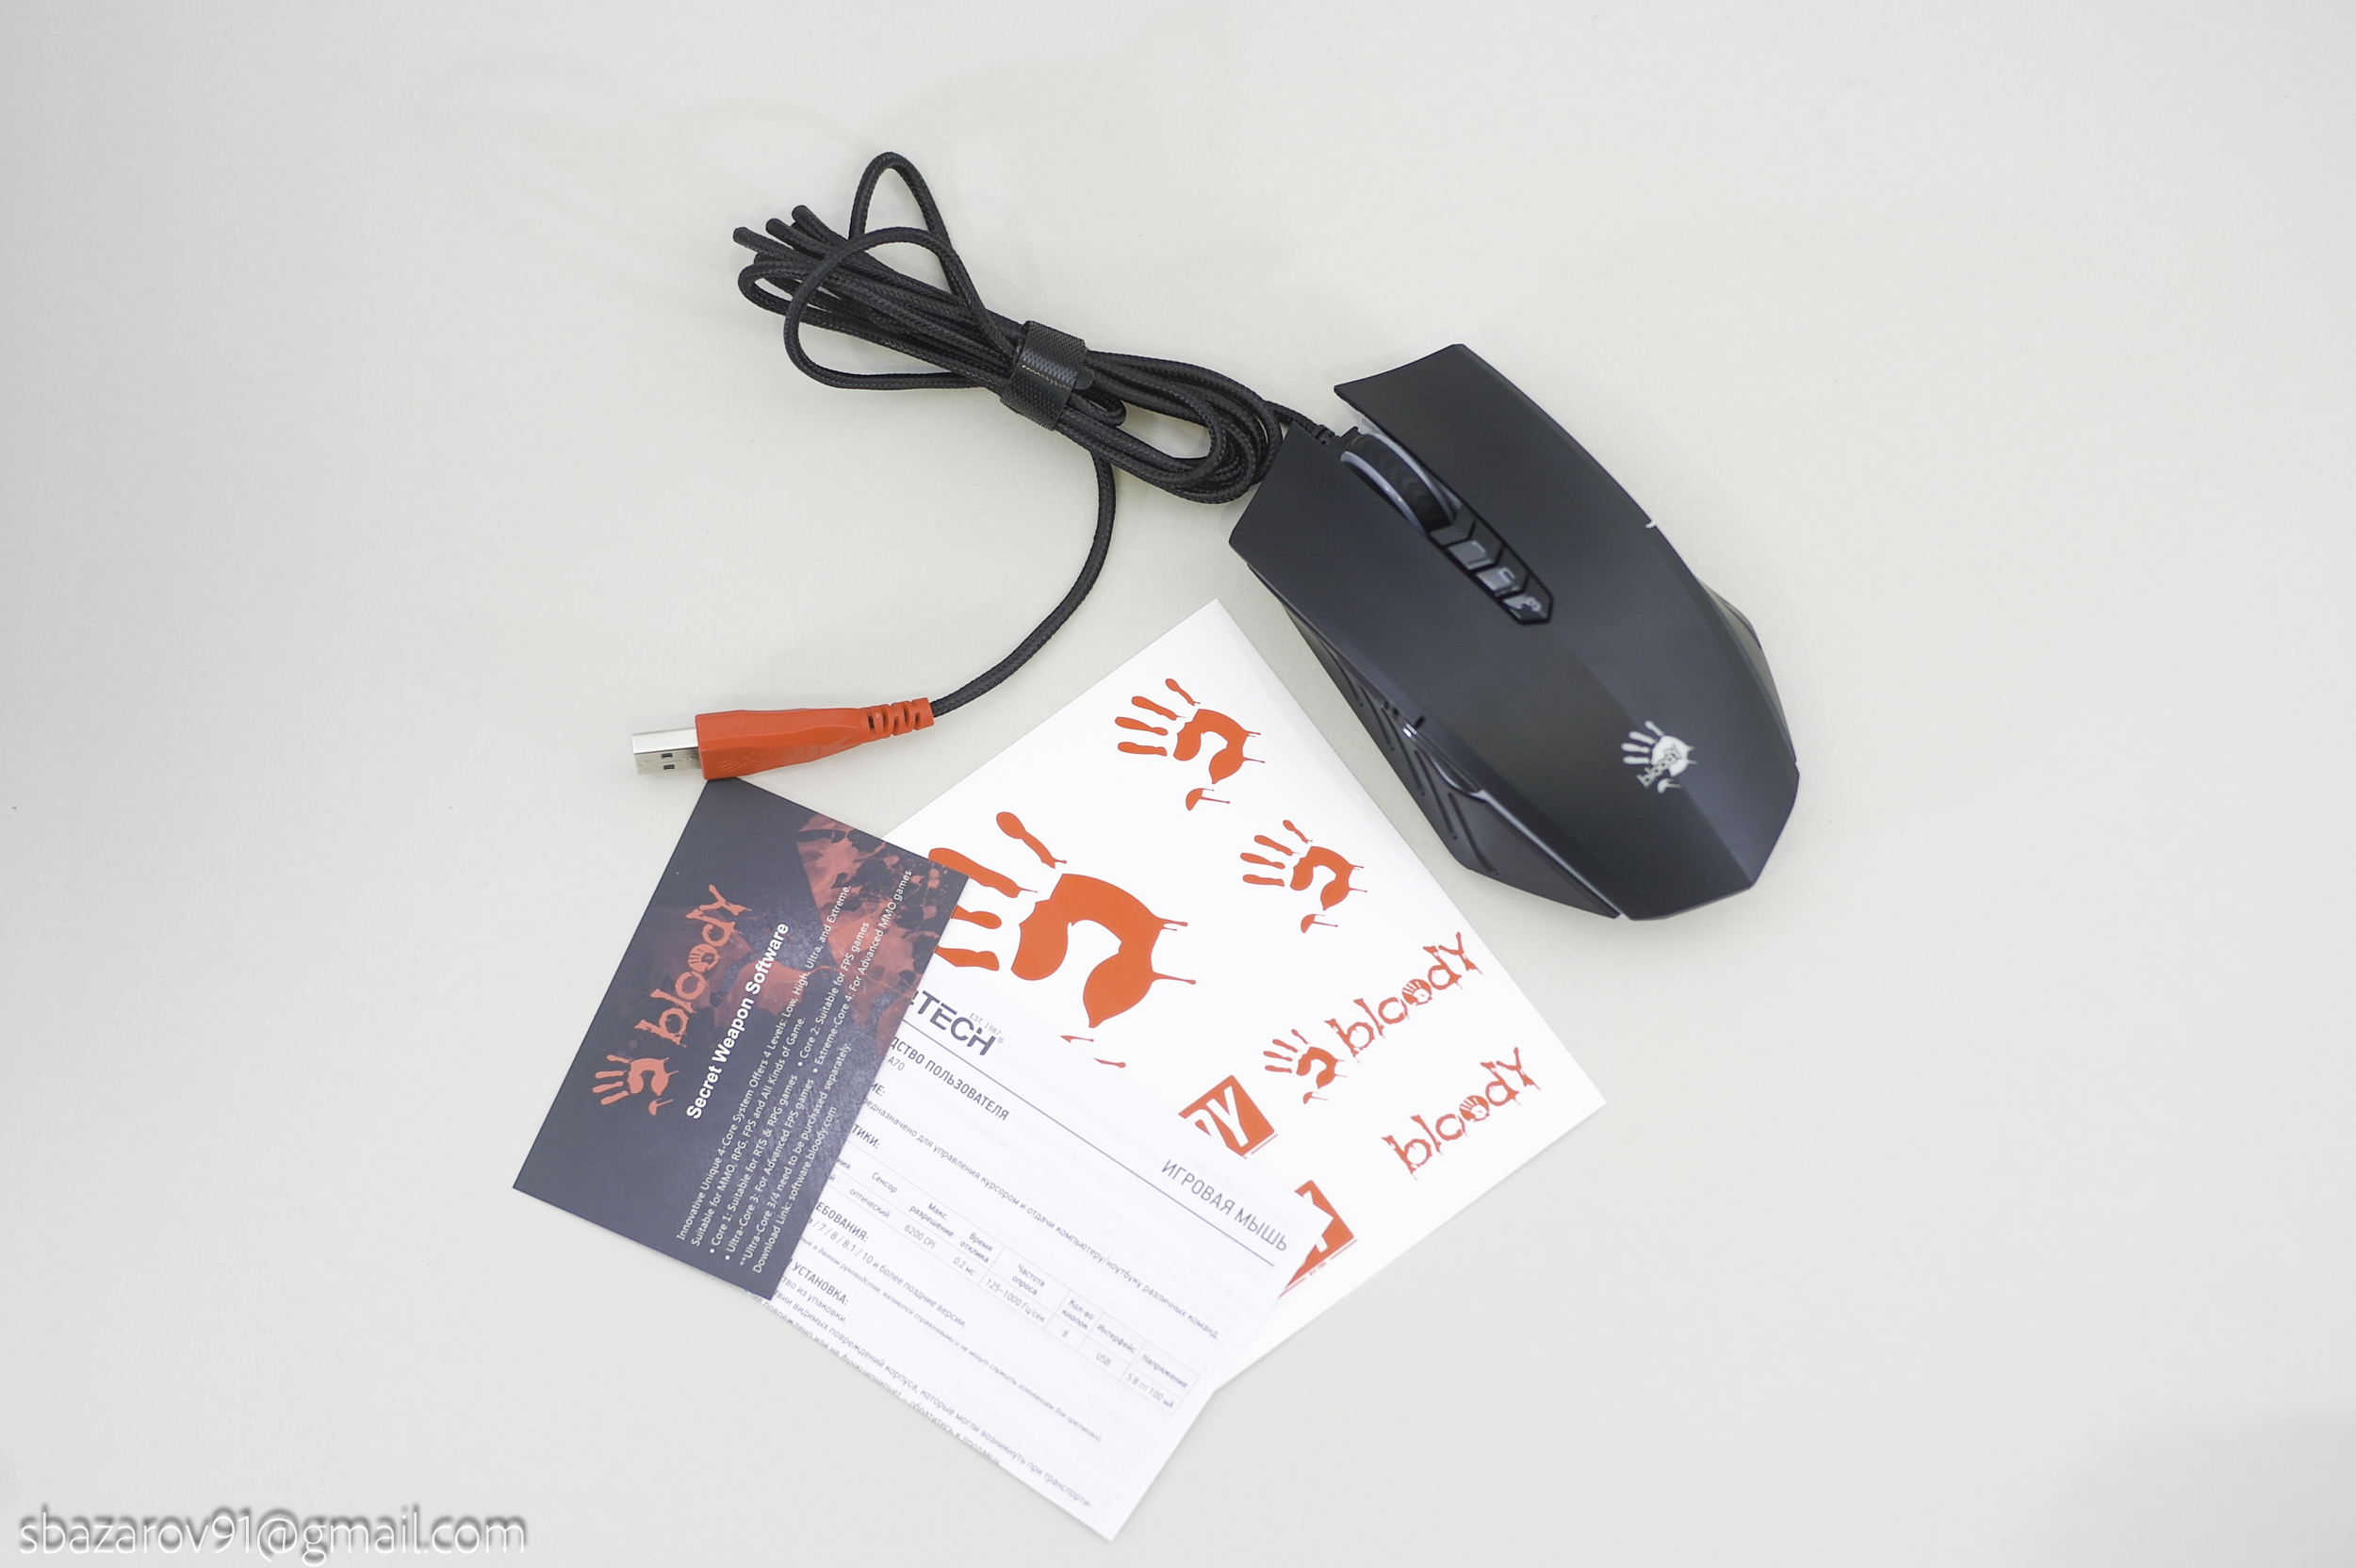 Bloody mouse a4tech rust обход фото 99